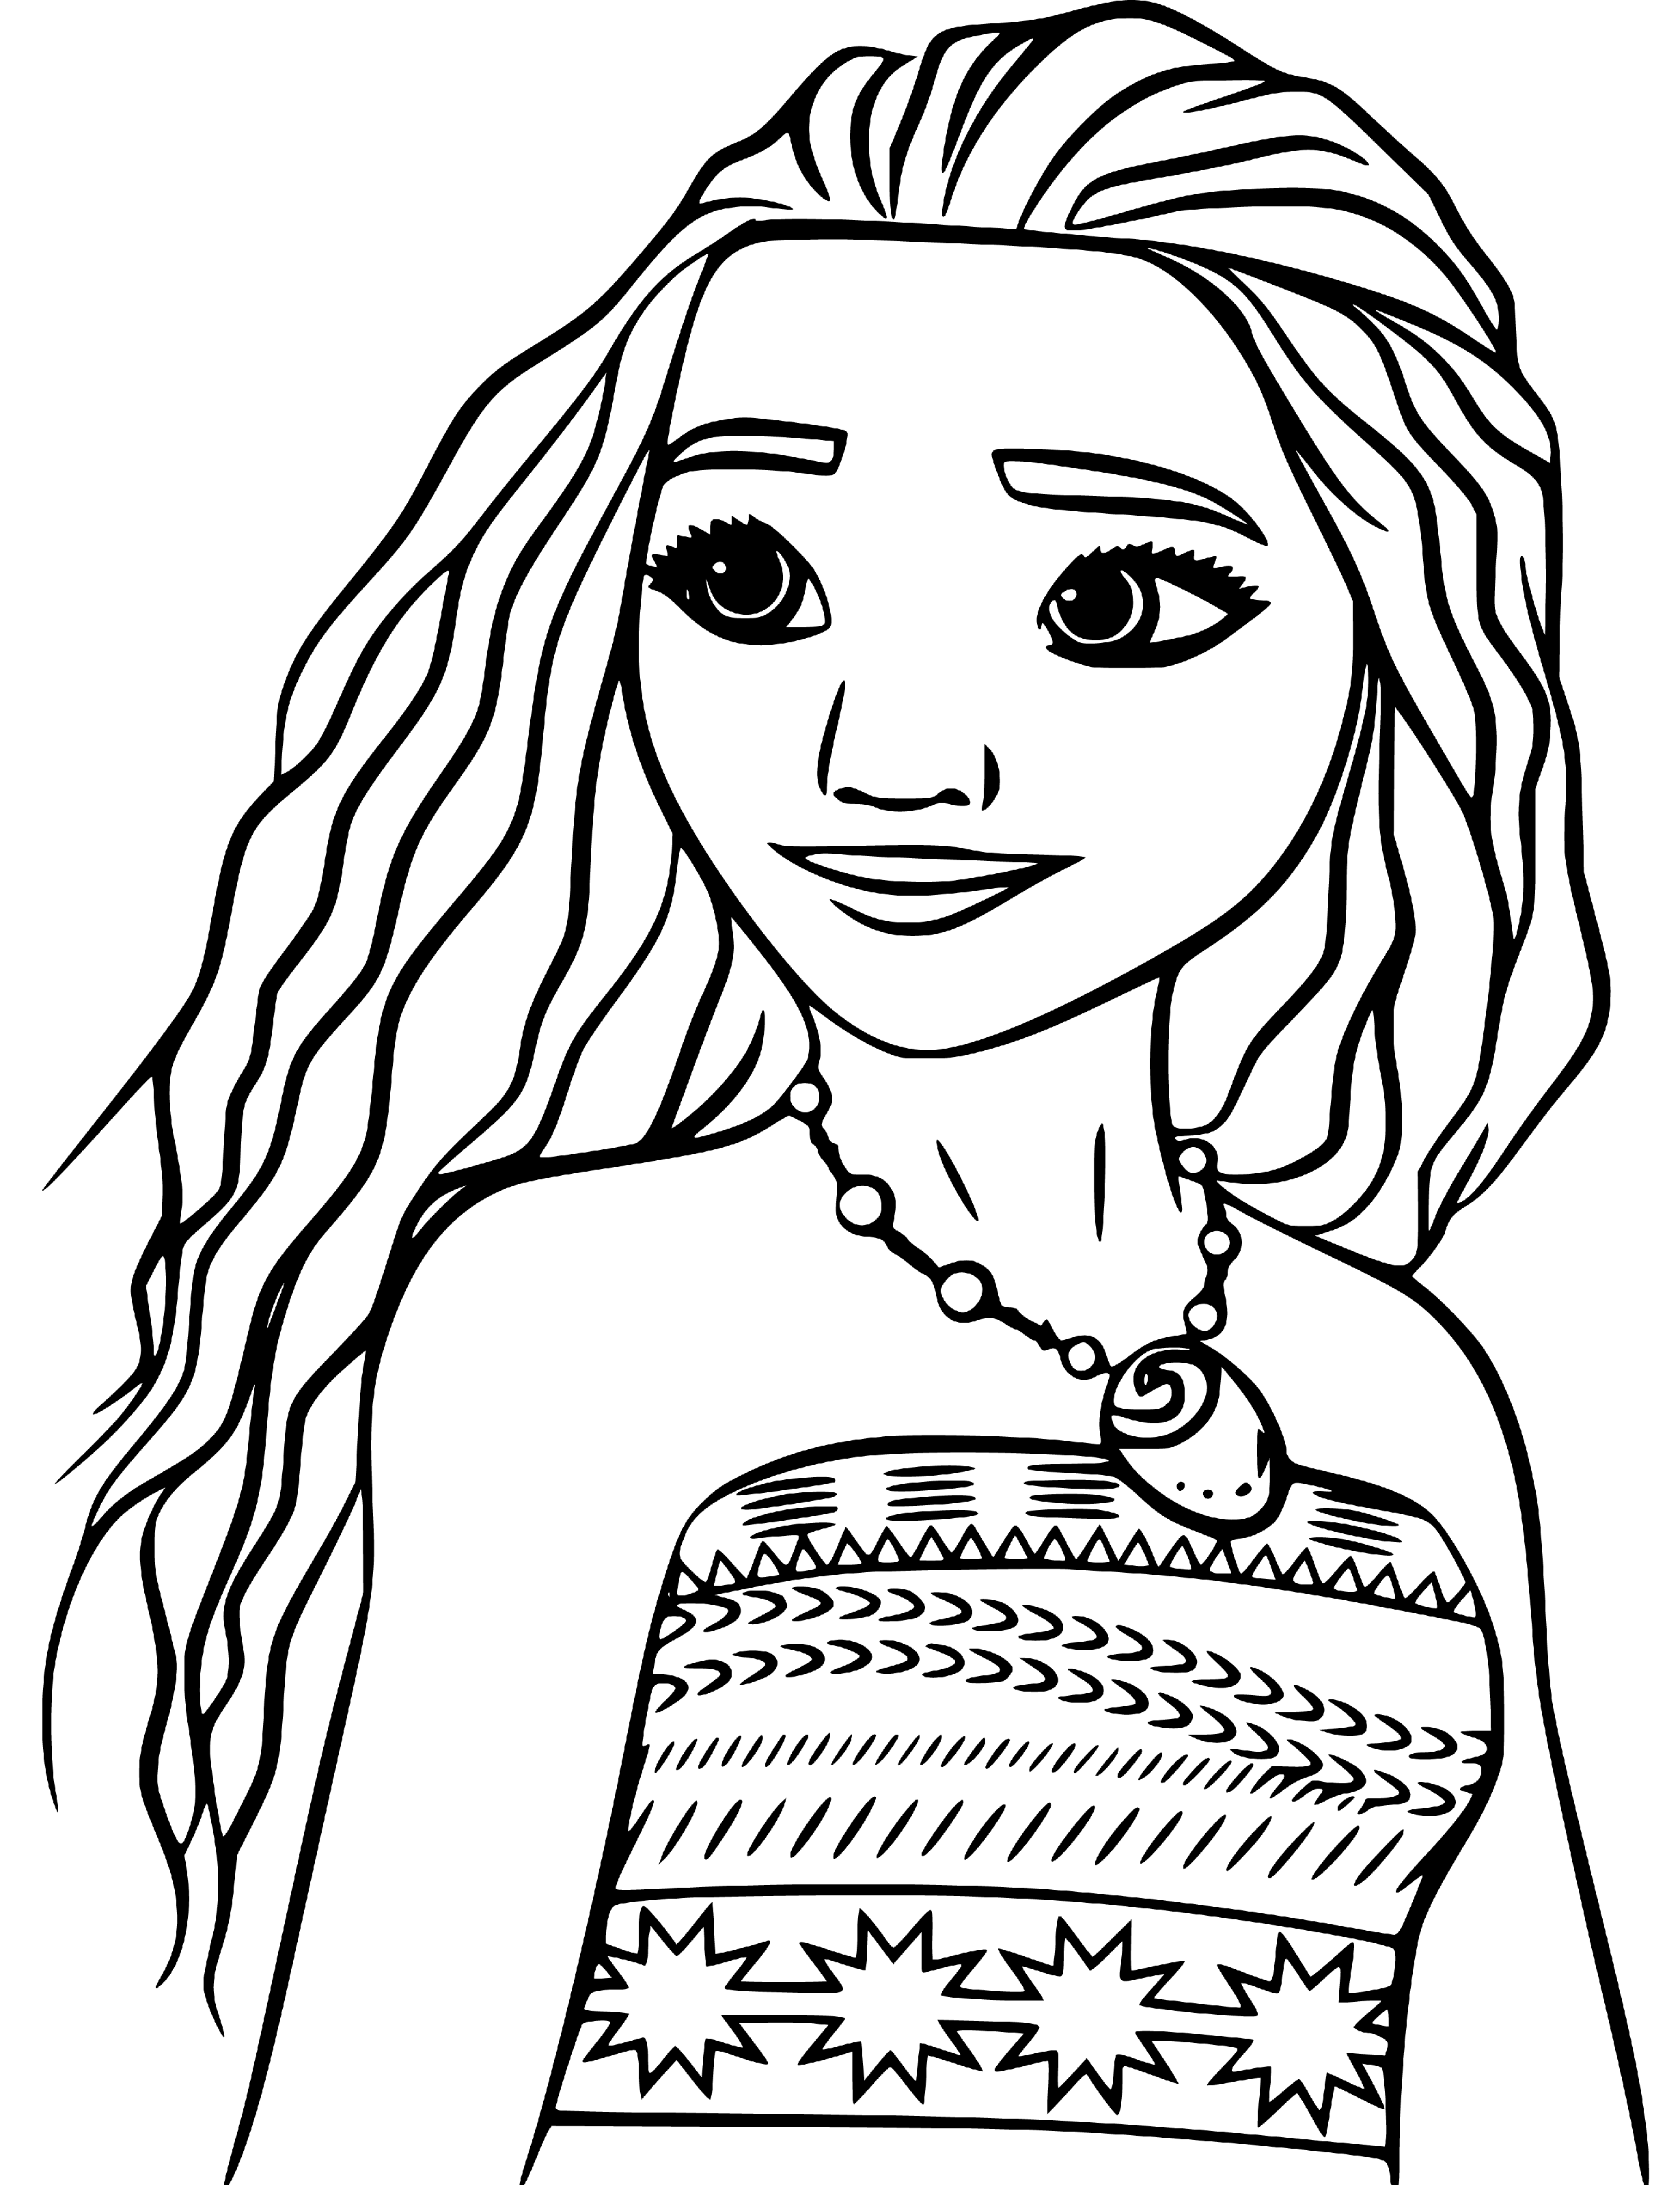 Printable Beautiful Moana Coloring Page for kids.